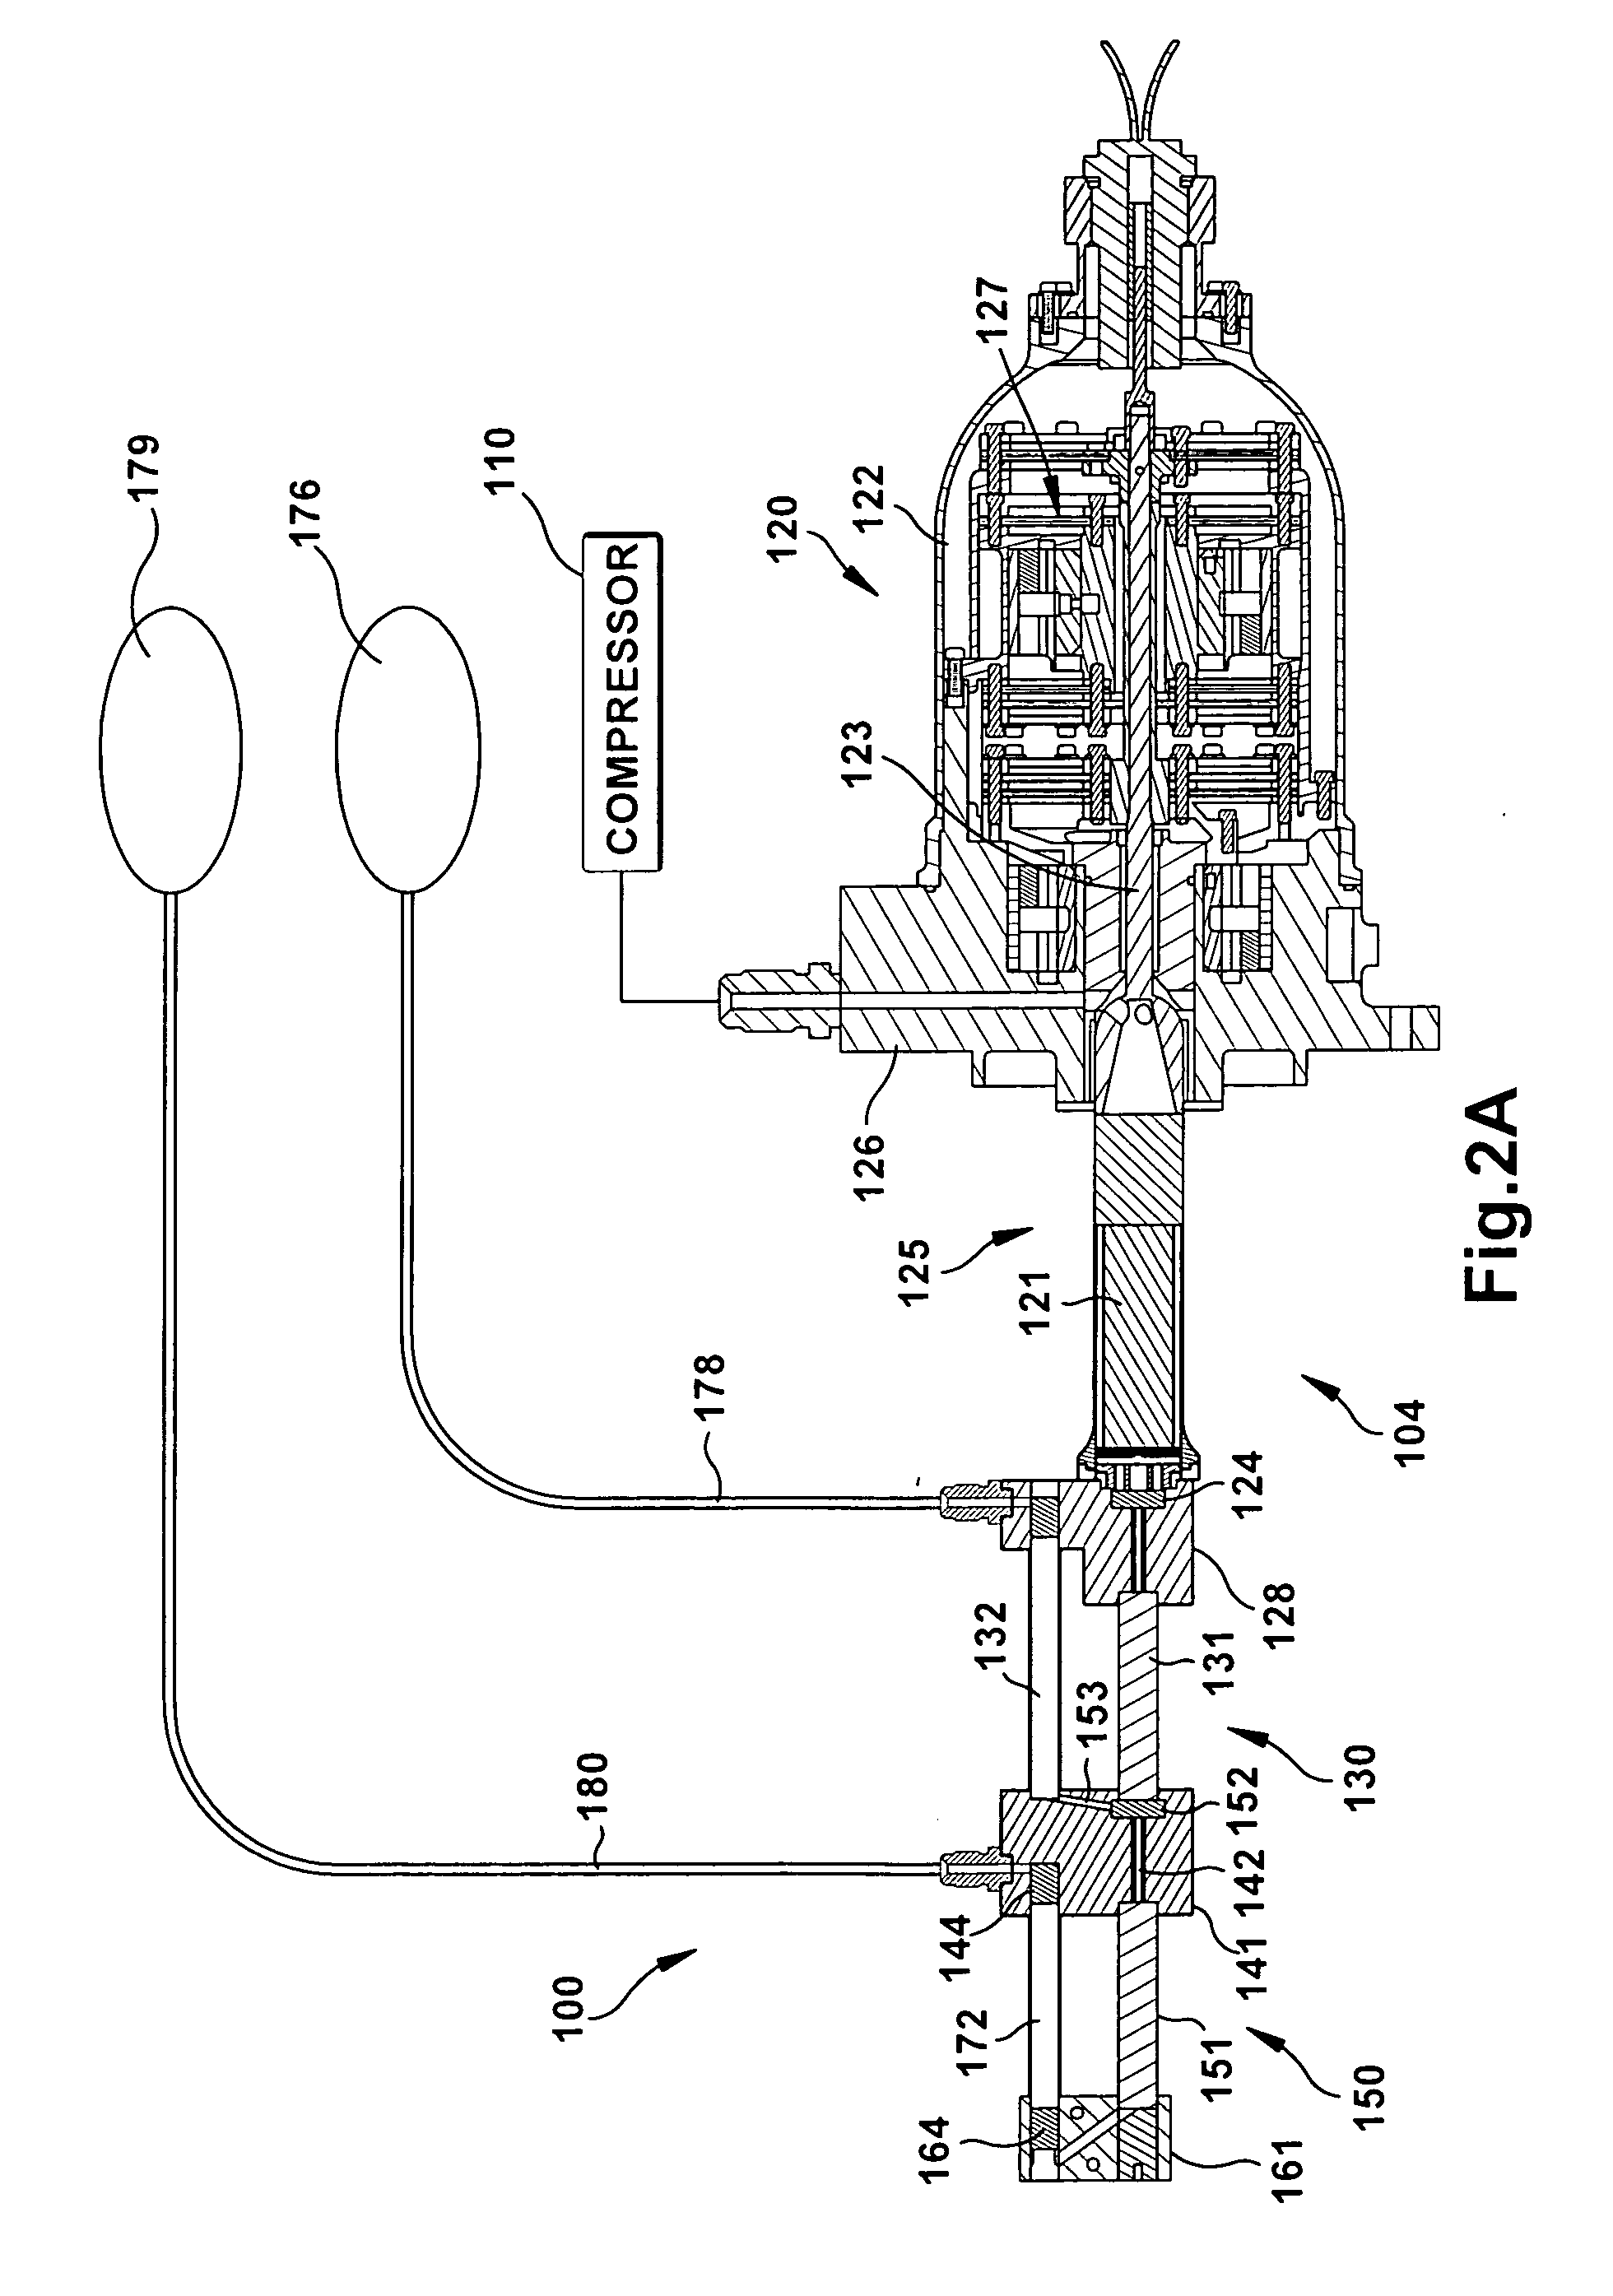 Hybrid cryocooler with multiple passive stages